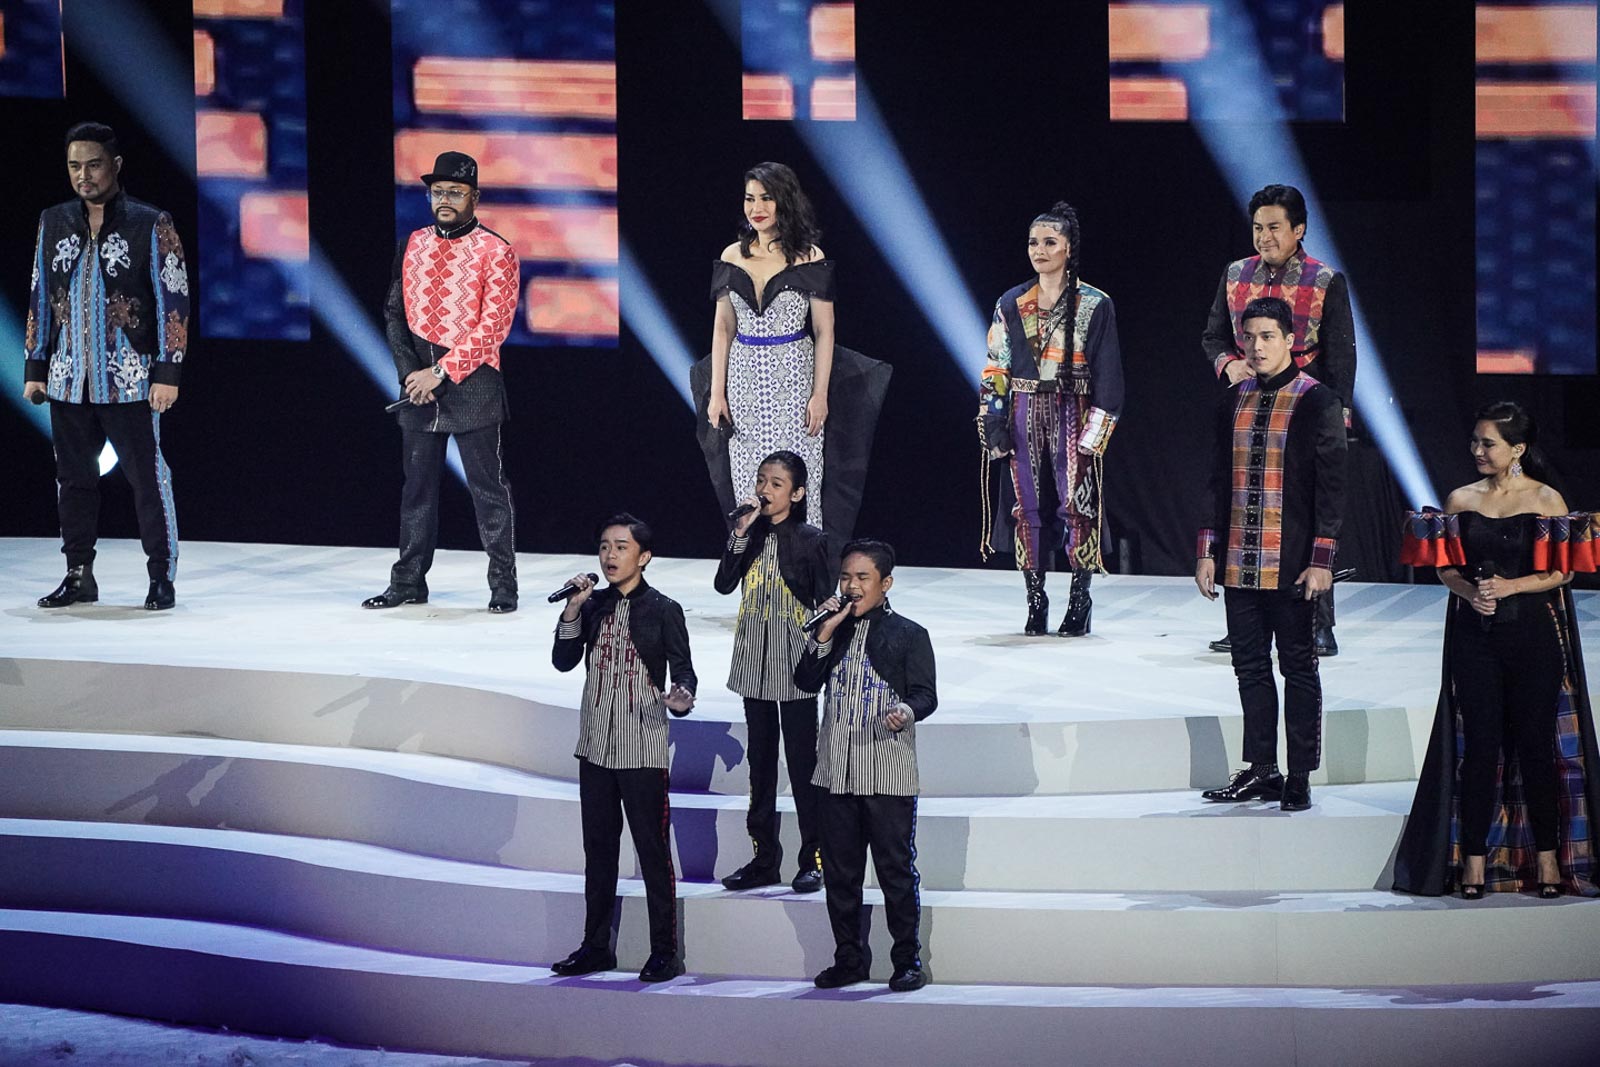 WIN AS ONE. Filipino singers including Jed Madela, Apl.de.ap, Lani Misalucha, the TNT Boys, KZ Tandingan, Robert Seña, Elmo Magalona, and Aicelle Santos come together to sing the SEA Games 2019 official song 'We Win As One' at the opening ceremonies. Photo by Josh Albelda/Rappler 